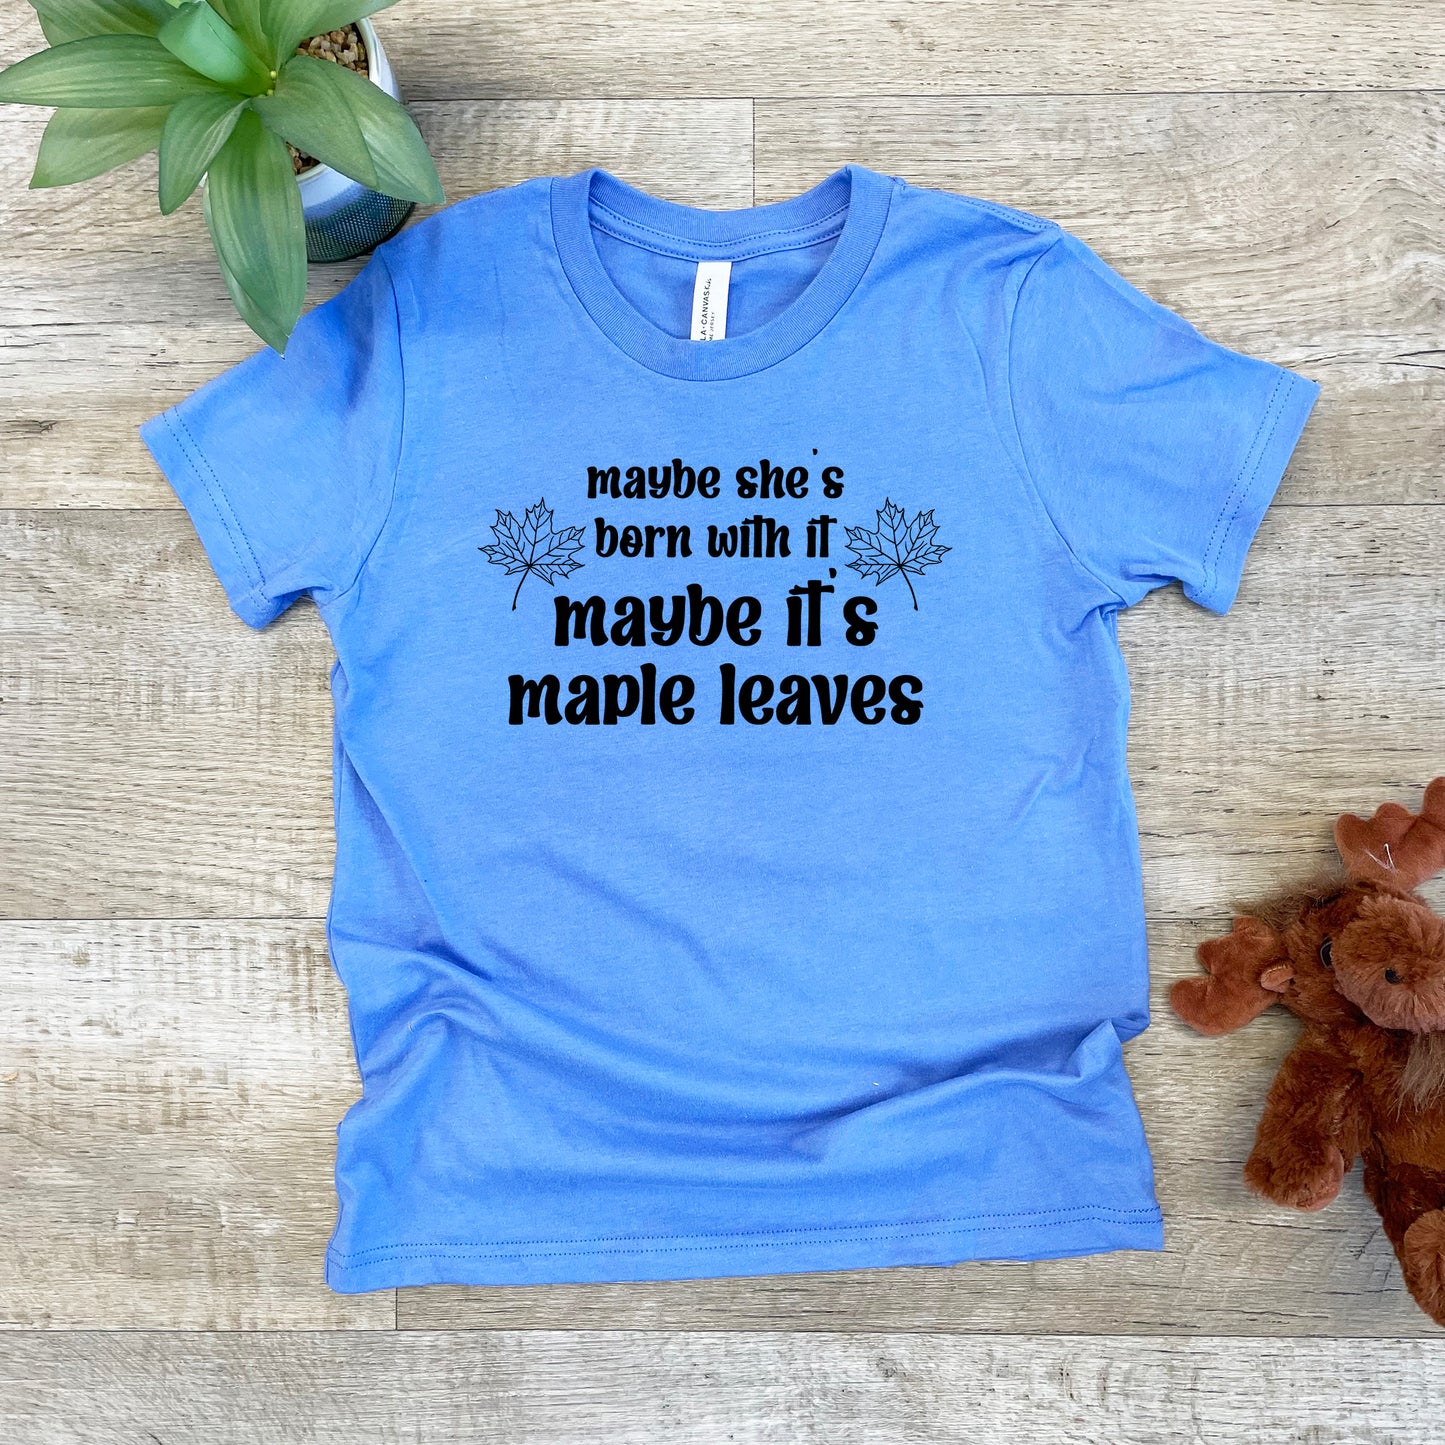 Maybe She's Born With It, Maybe It's Maple Leaves - Kid's Tee - Columbia Blue or Lavender